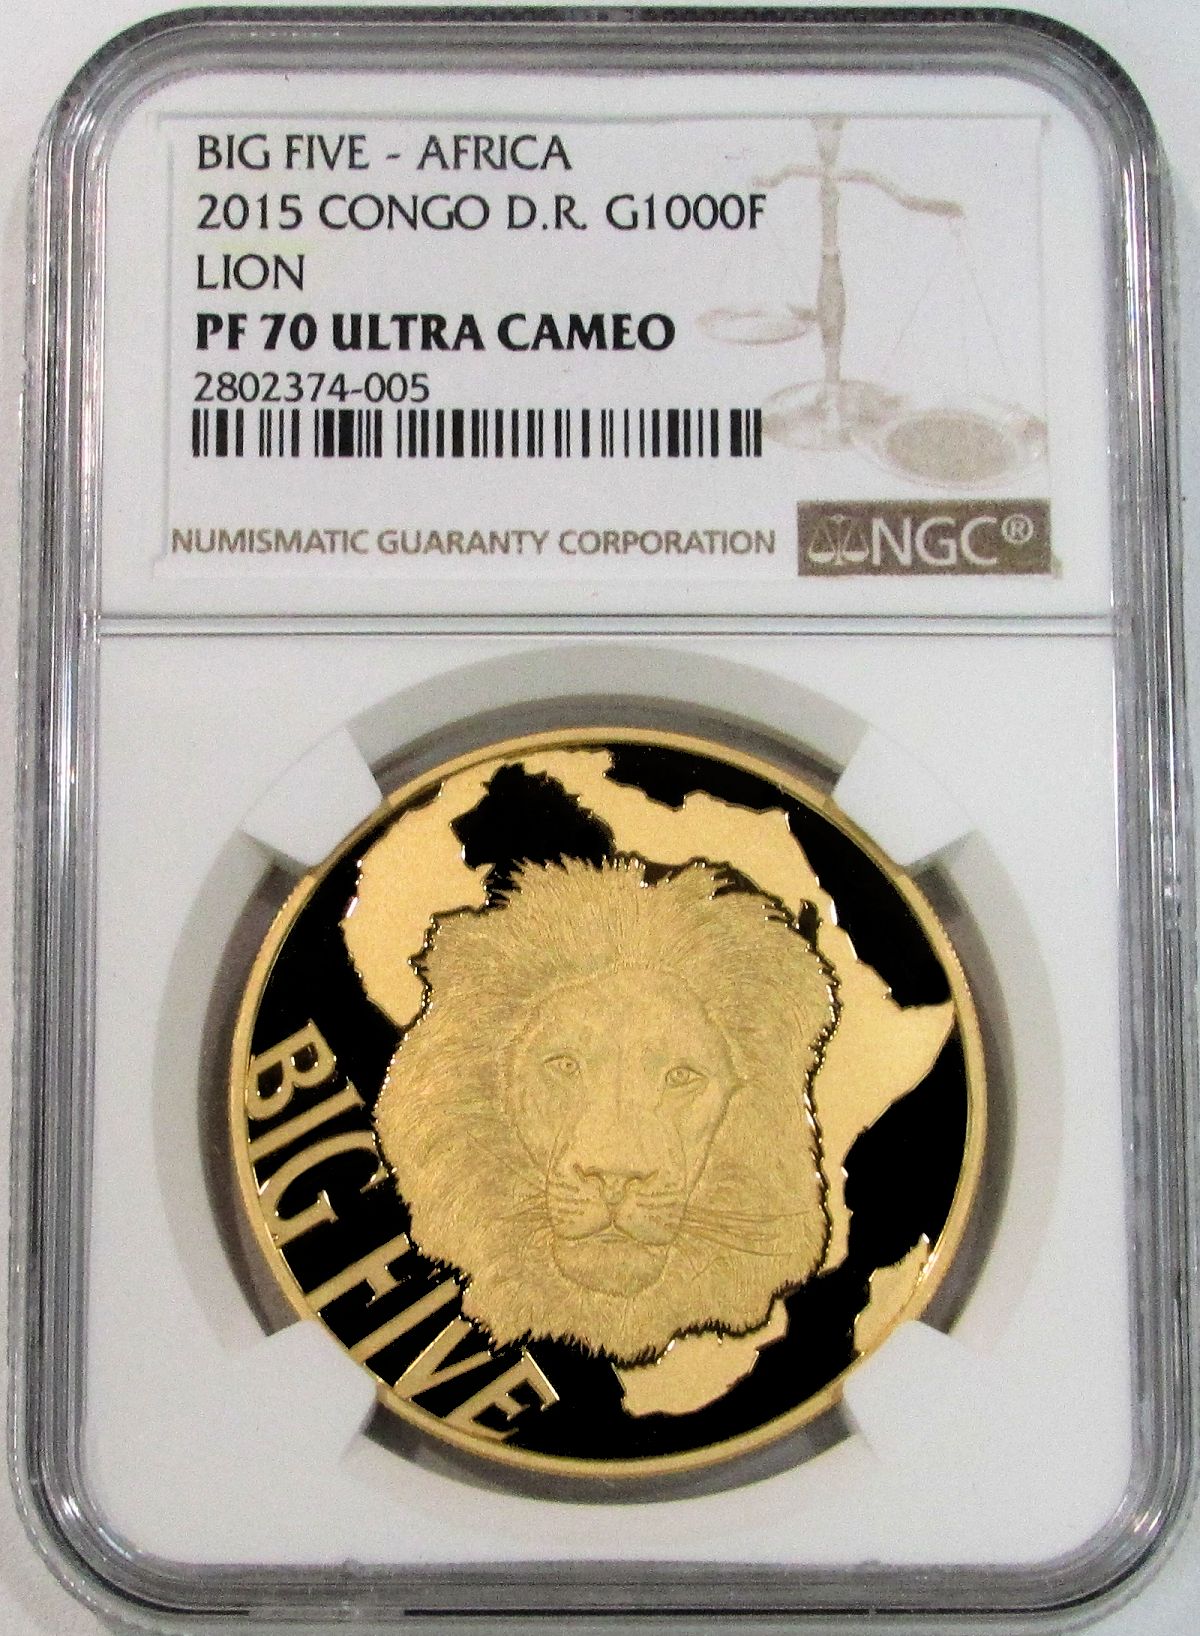 2015 GOLD CONGO 1000 FRANCS BIG FIVE AFRICA LIONS NGC PROOF 70 ULTRA CAMEO 300 MINTED